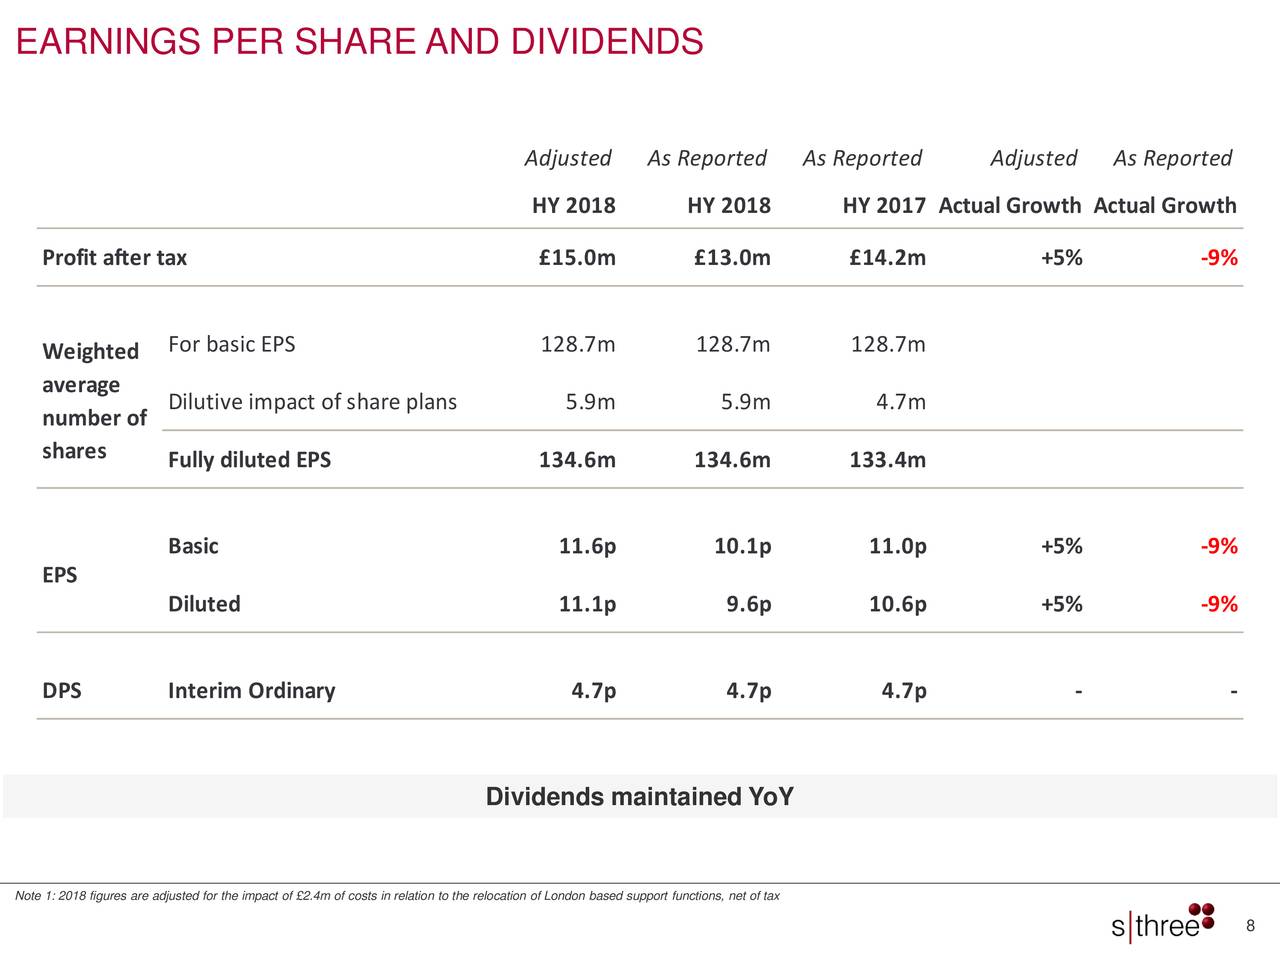 EARNINGS PER SHARE AND DIVIDENDS